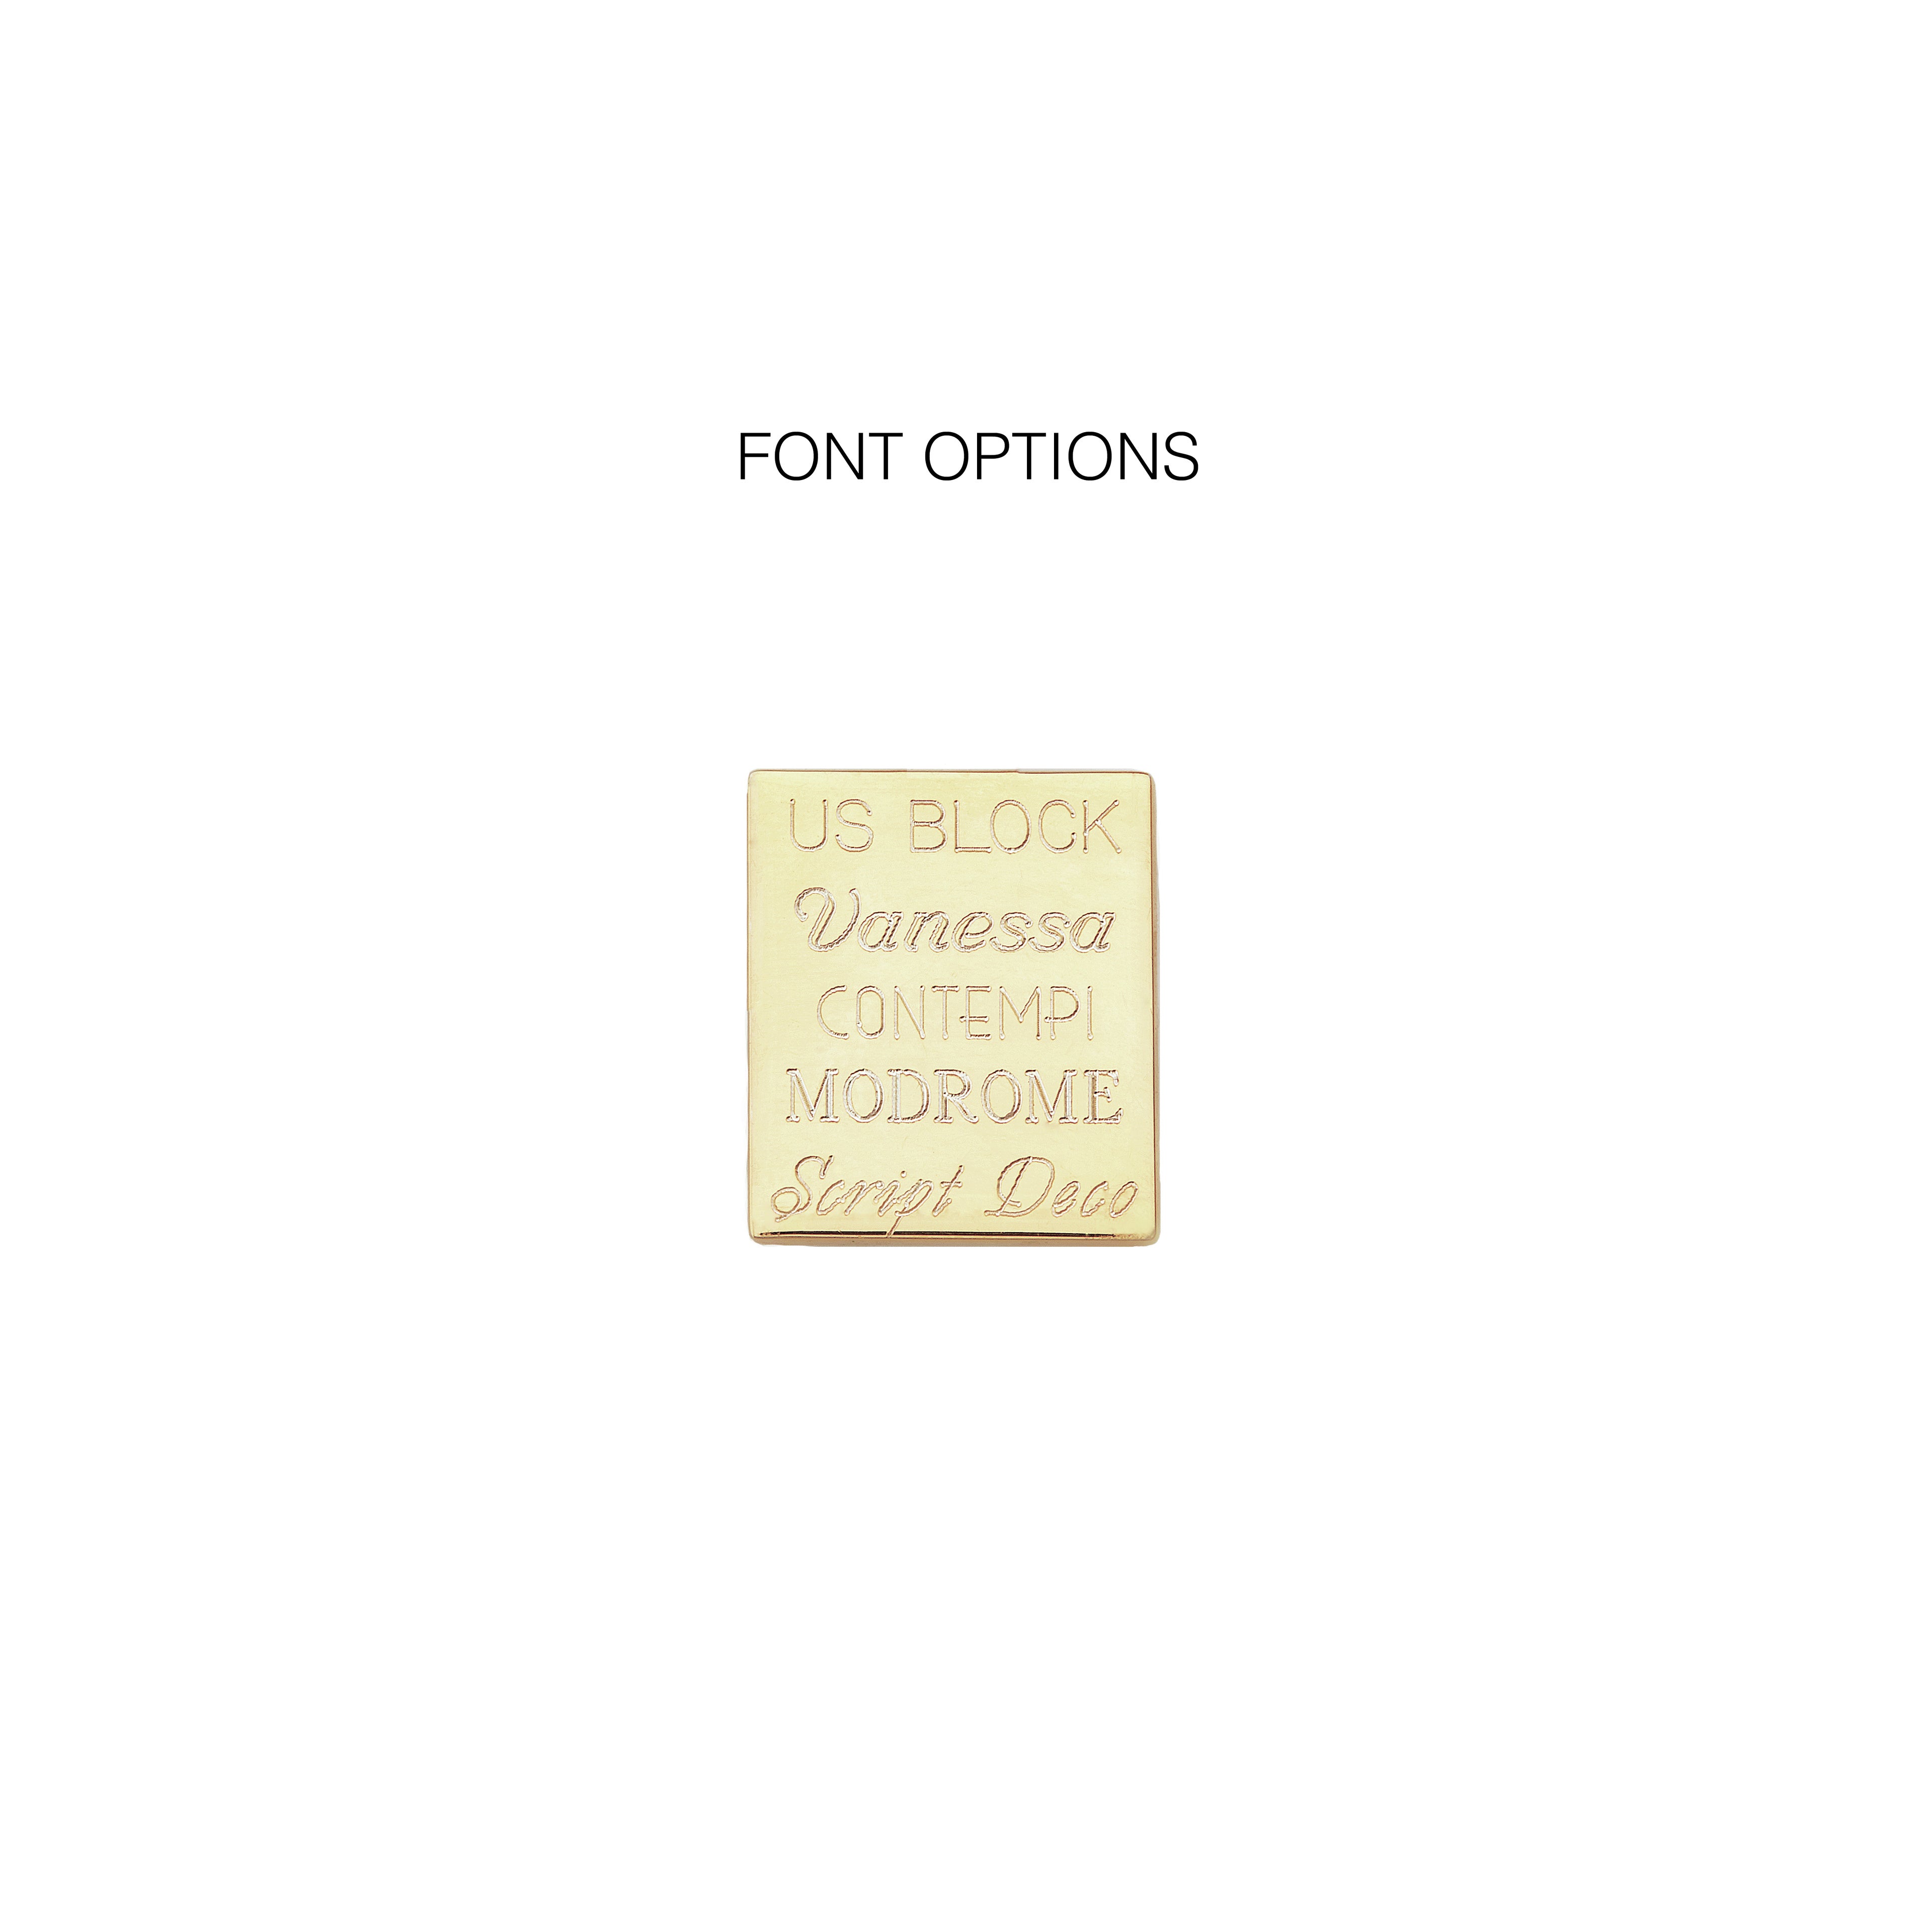 Font names engraved in their font type on a gold block